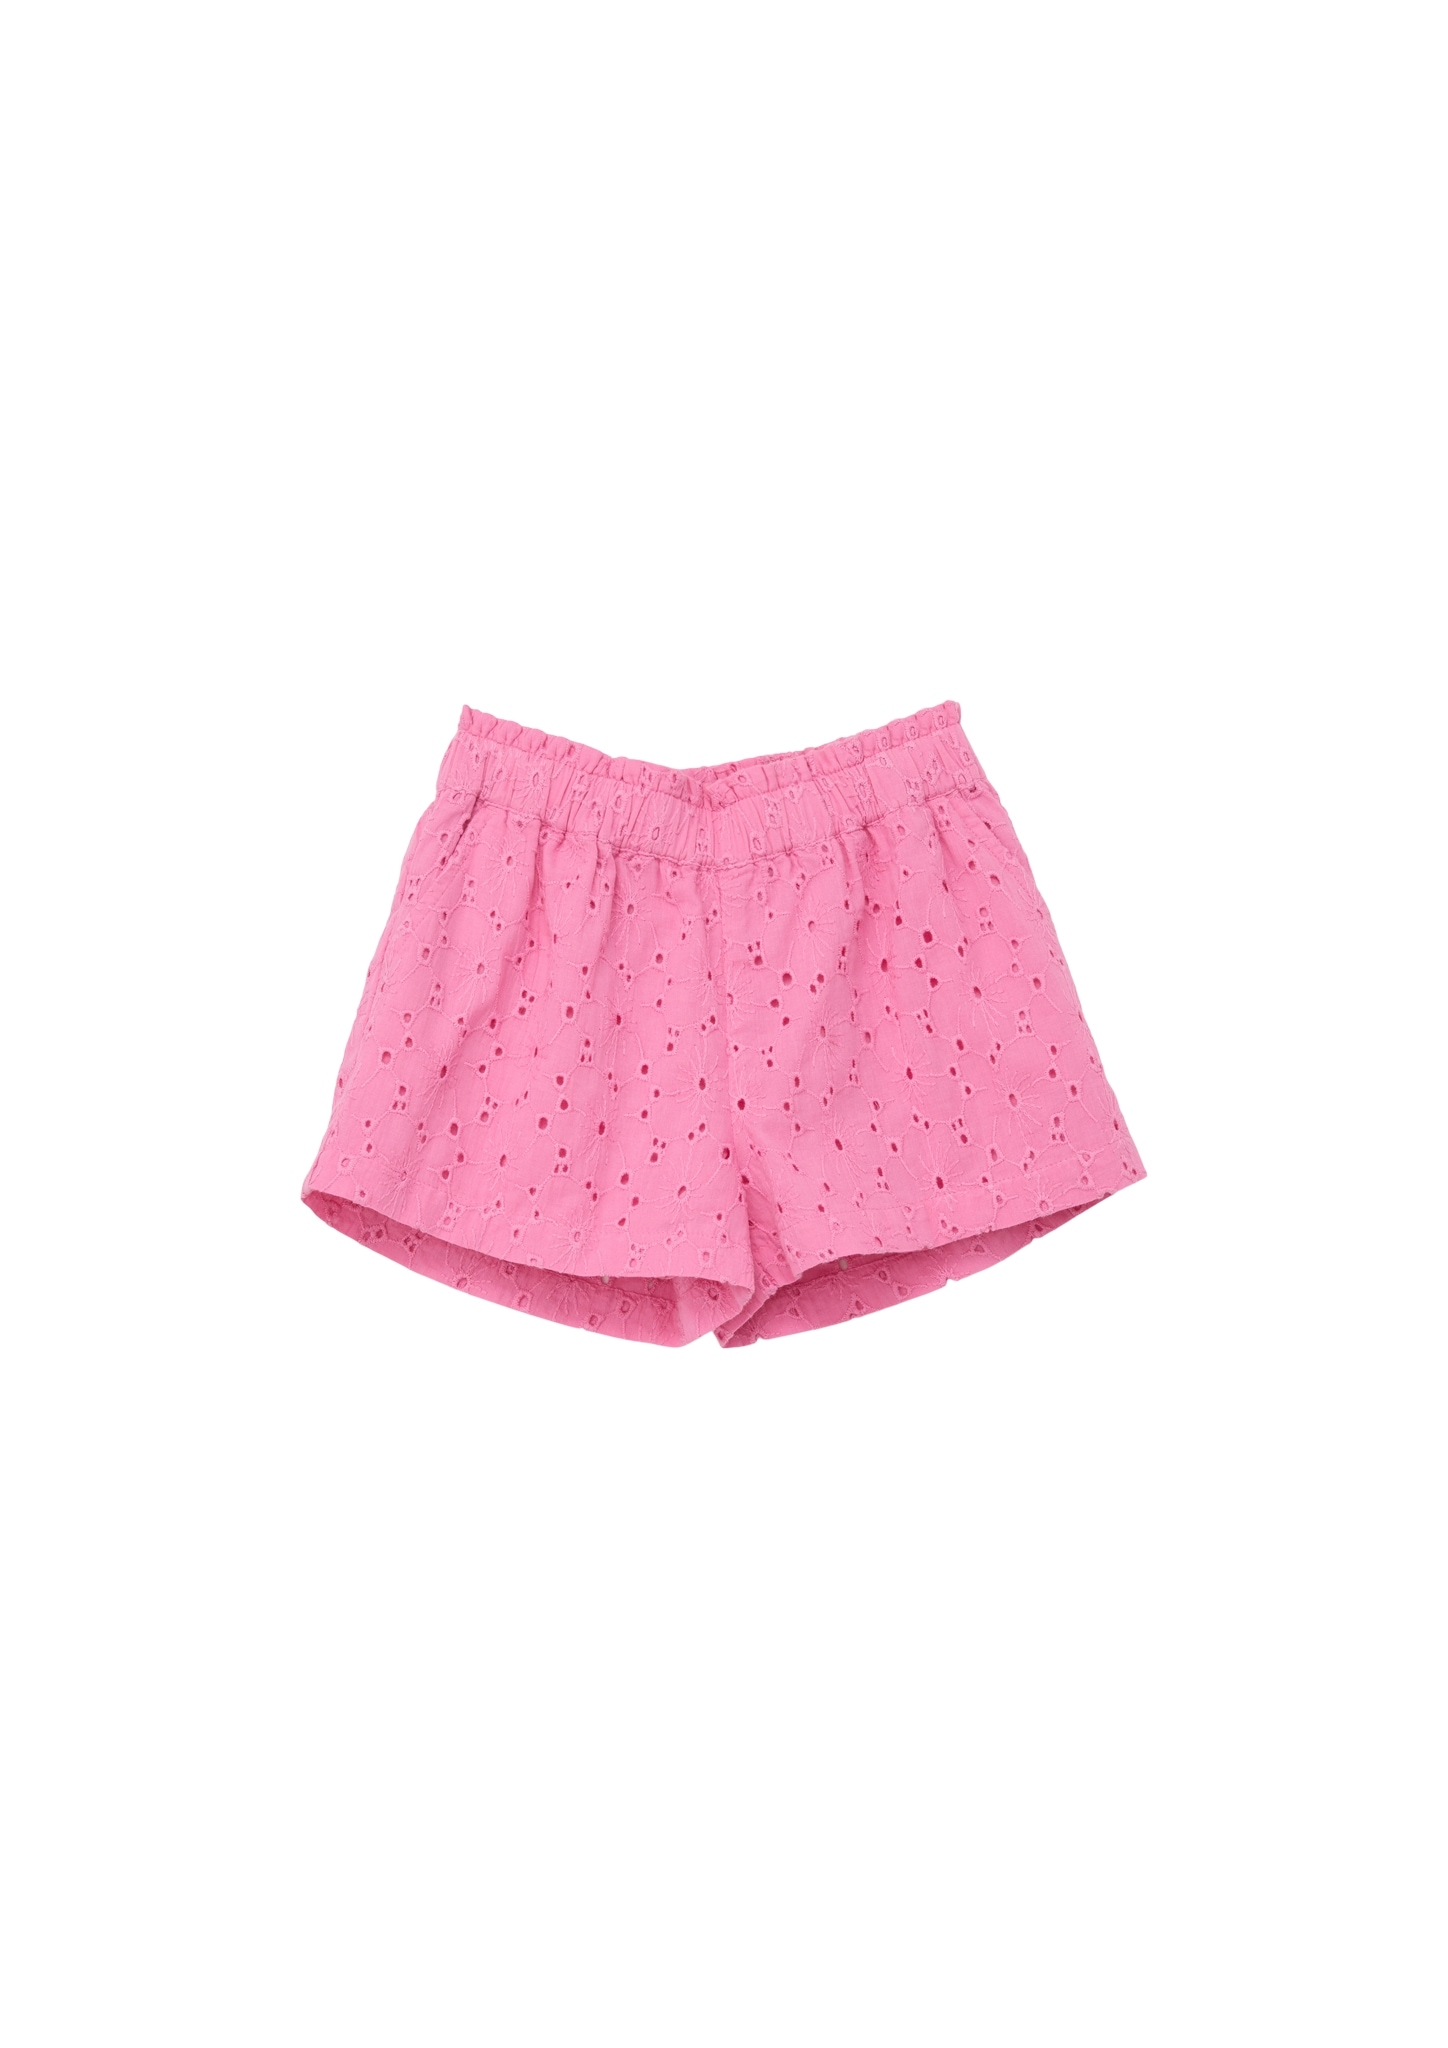 Shorts, Broderie bei Anglaise s.Oliver Junior mit OTTO